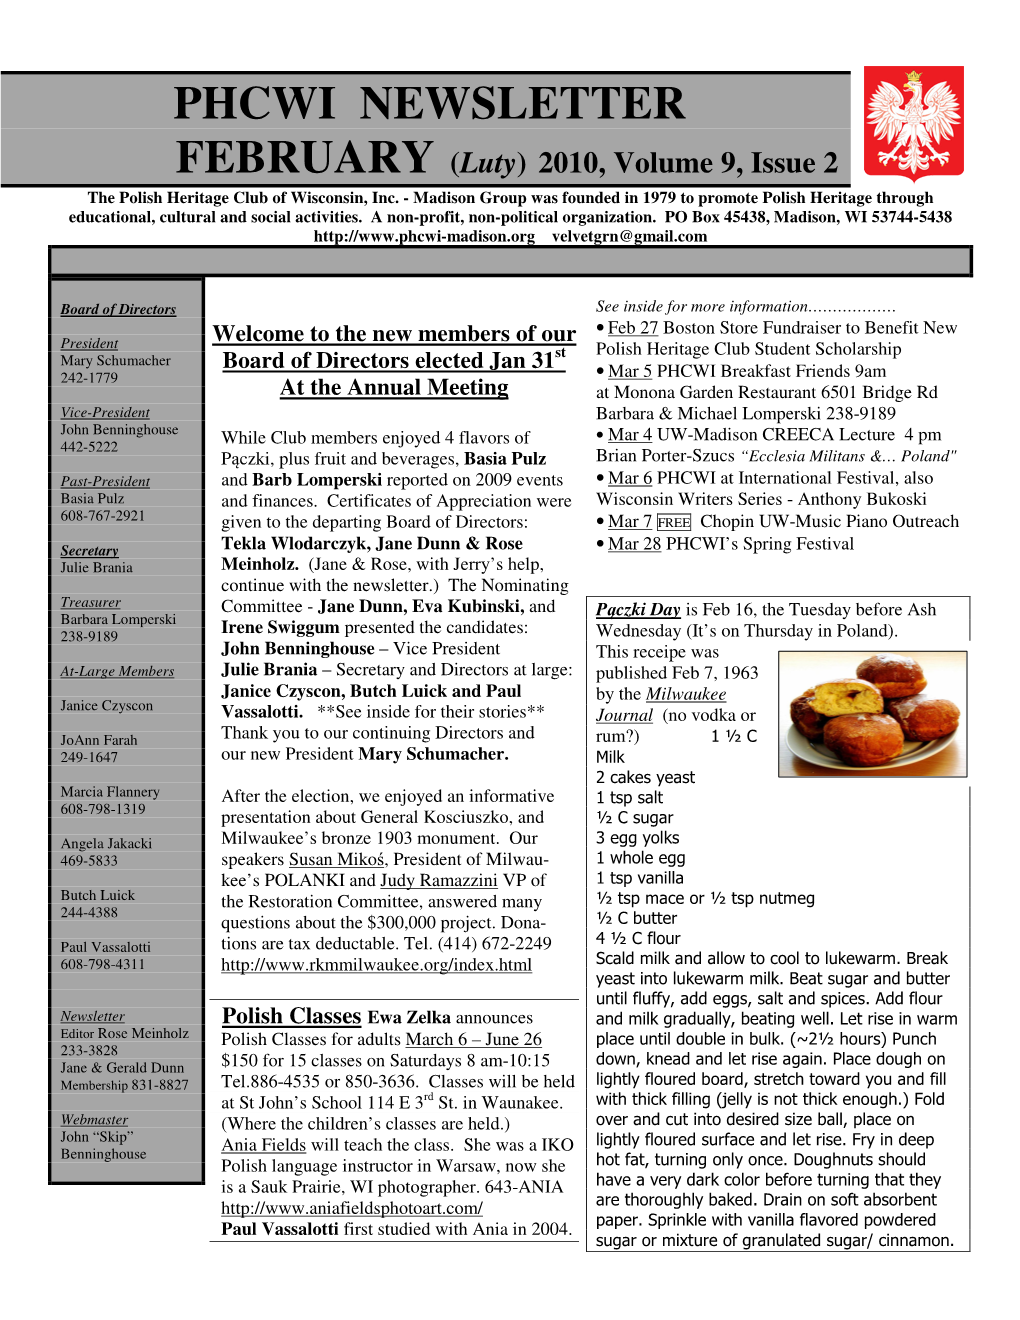 PHCWI NEWSLETTER FEBRUARY (Luty ) 2010, Volume 9, Issue 2 the Polish Heritage Club of Wisconsin, Inc